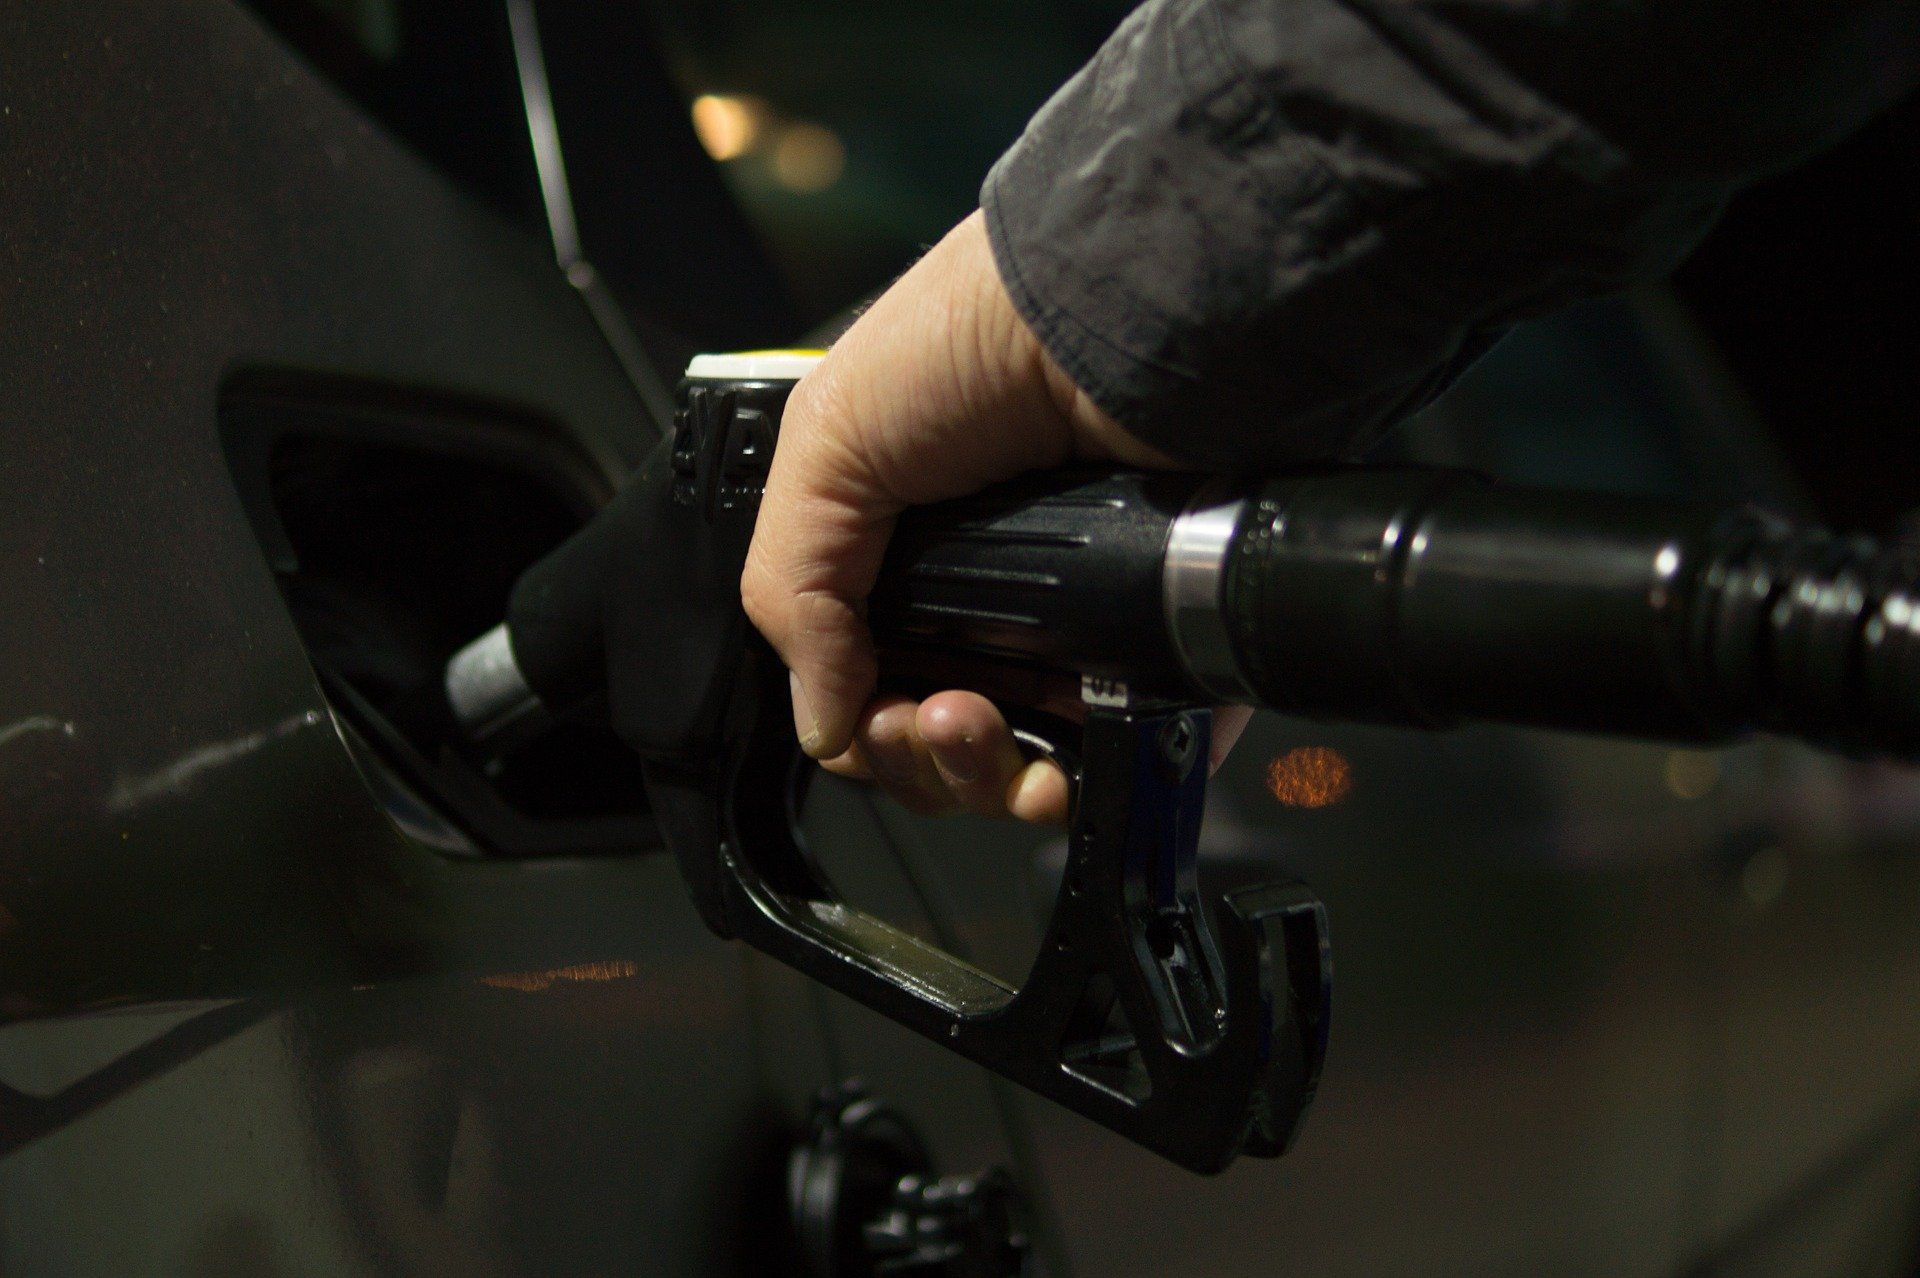 Fuel prices: Petrol priced at Rs 96.21, diesel Rs 87.47 in Delhi on March 22, 2022